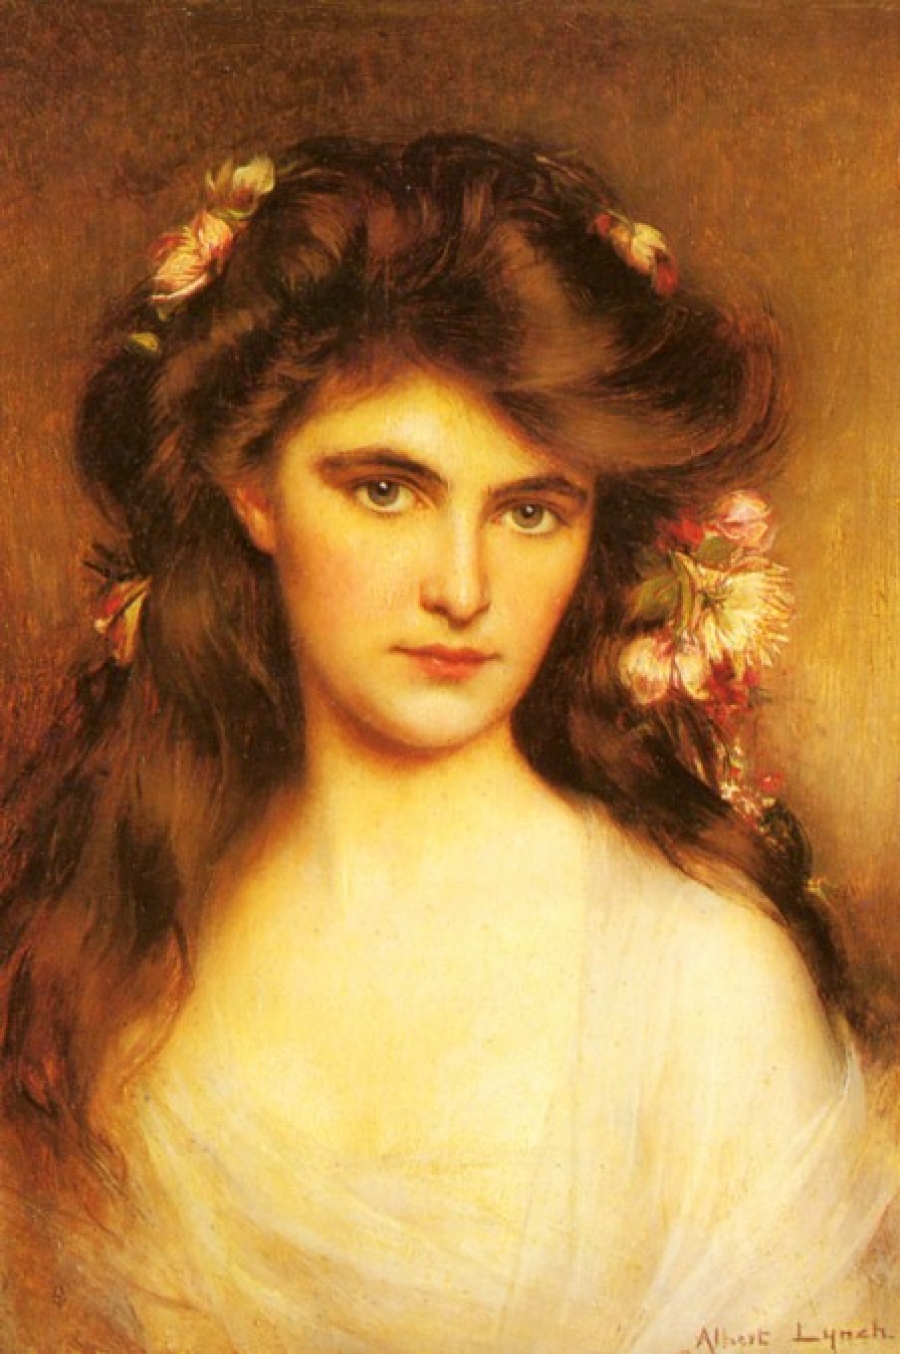 A Young Beauty with Flowers in her Hair by Albert Lynch